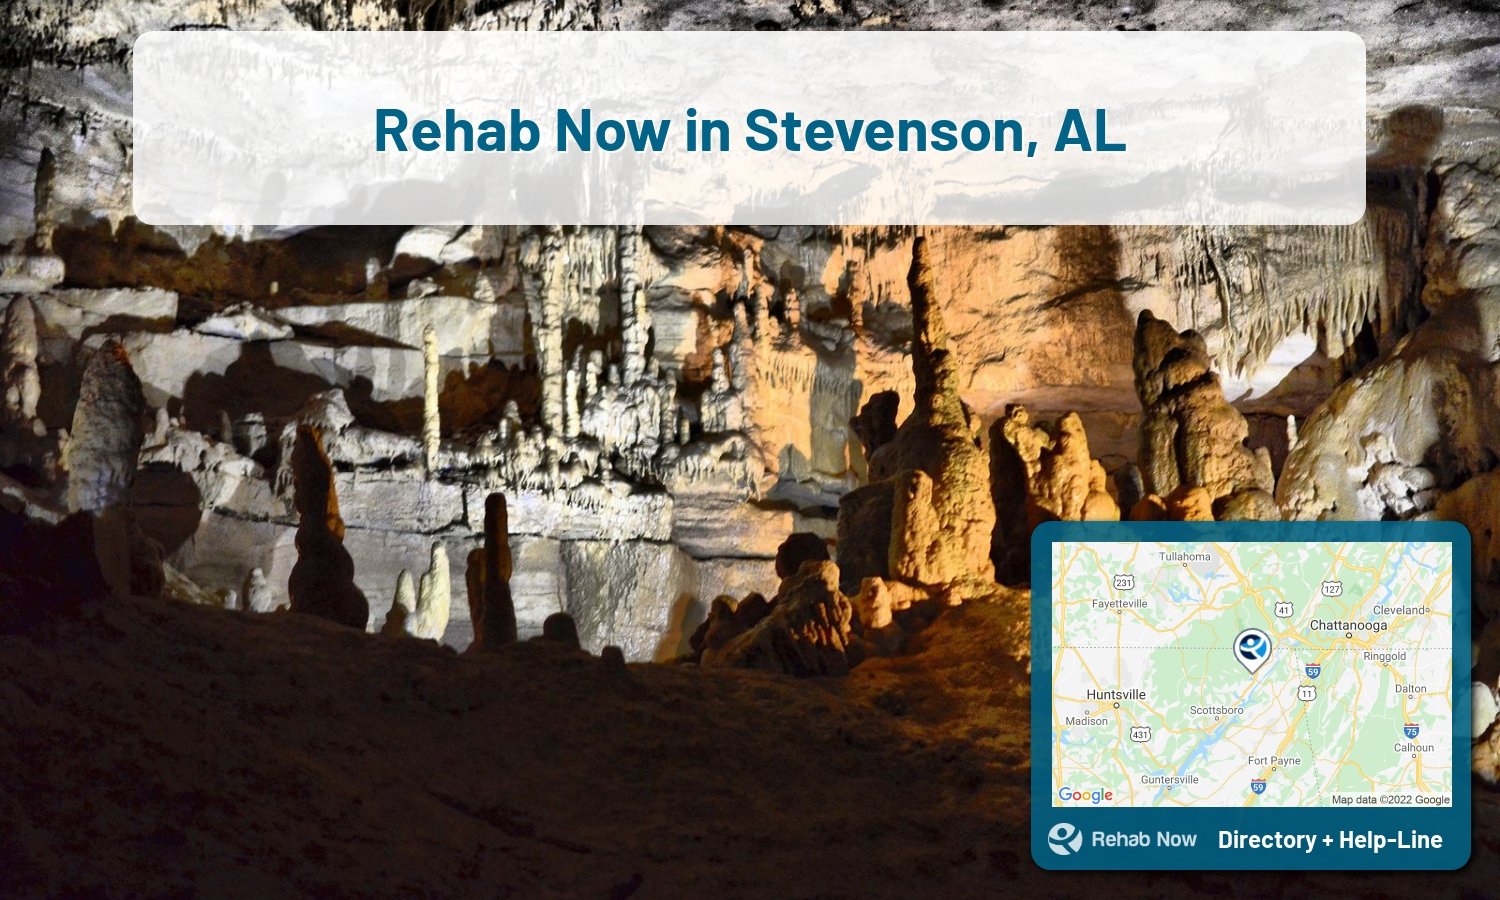 Stevenson, AL Treatment Centers. Find drug rehab in Stevenson, Alabama, or detox and treatment programs. Get the right help now!